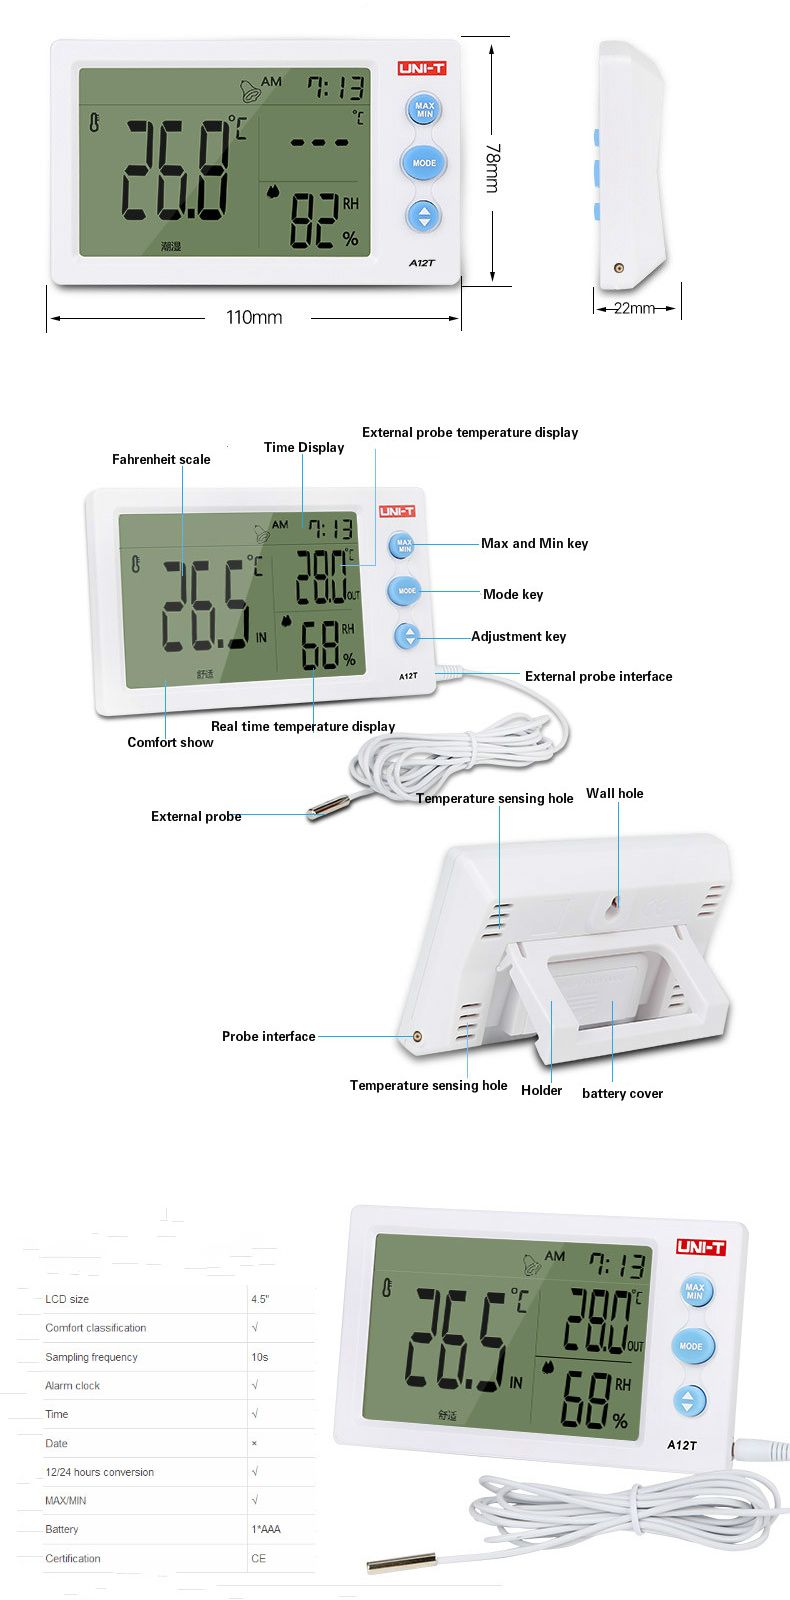 UNI-T-A12T-Digital-LCD-Thermometer-Hygrometer-Temperature-Humidity-Meter-Alarm-Clock-Weather-Station-1218090